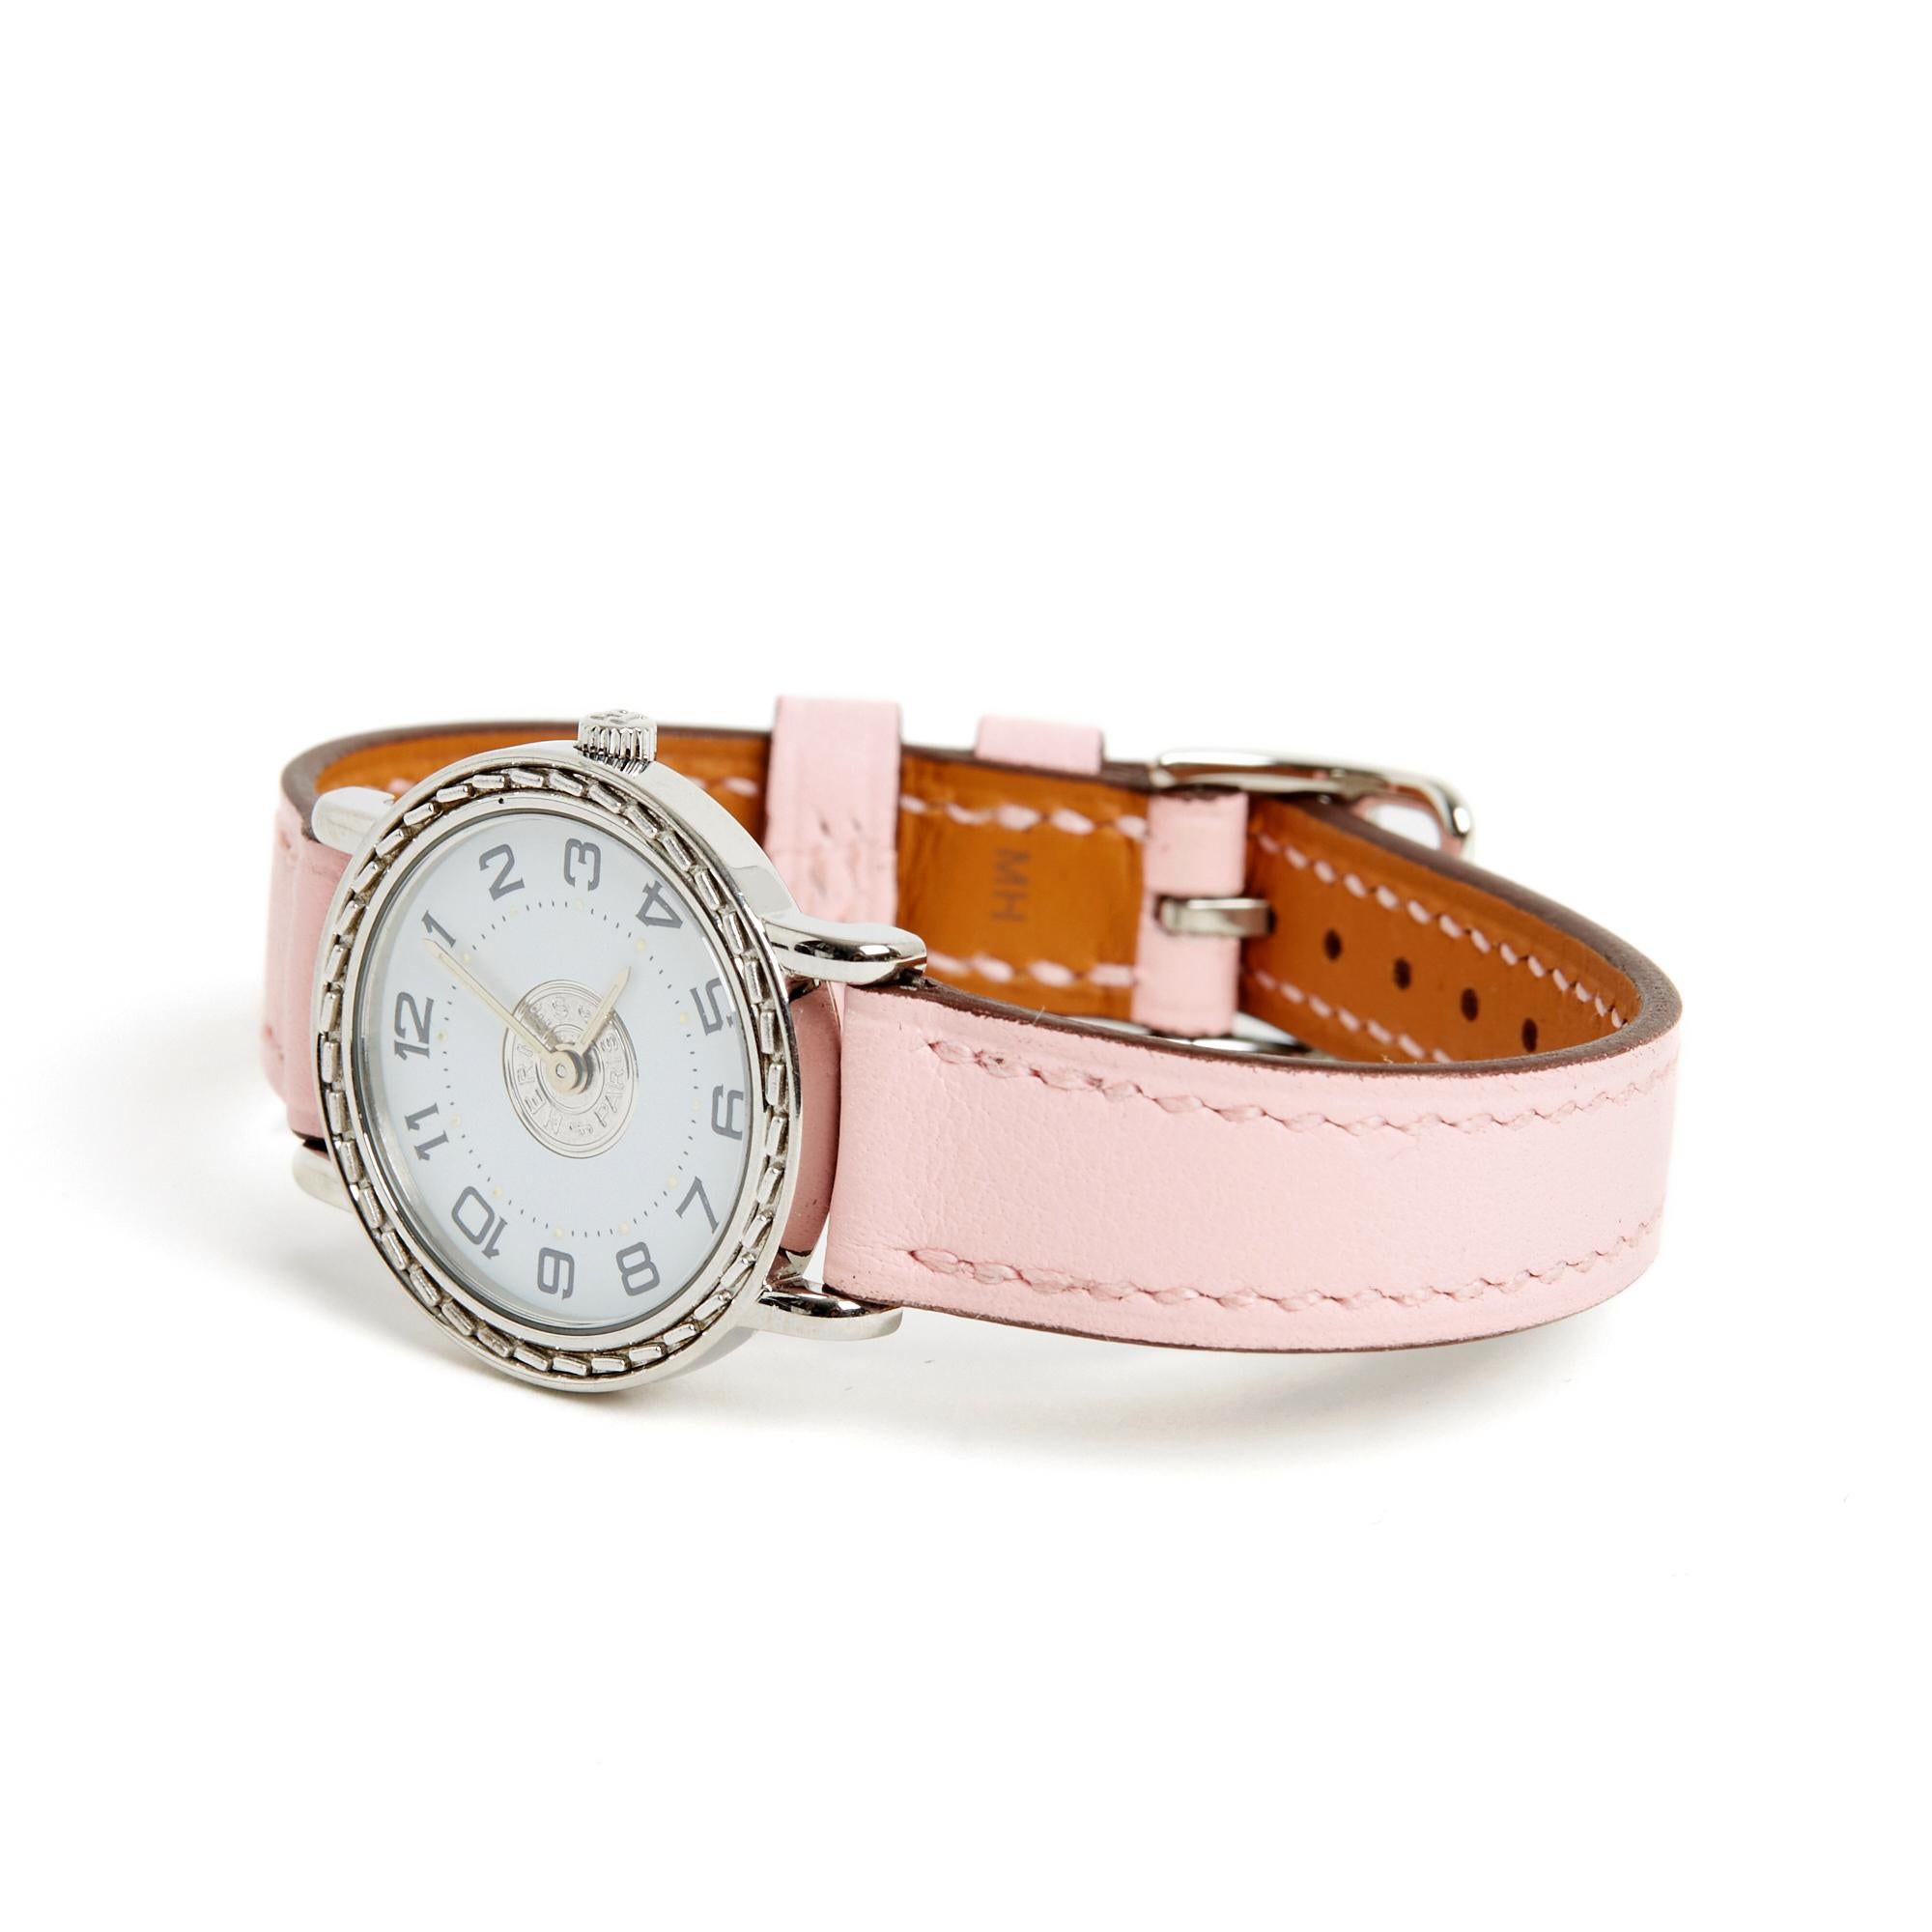 Hermès model Sellier PM format watch in steel, quartz movement, white dial with Arabic numerals, pale pink leather strap (